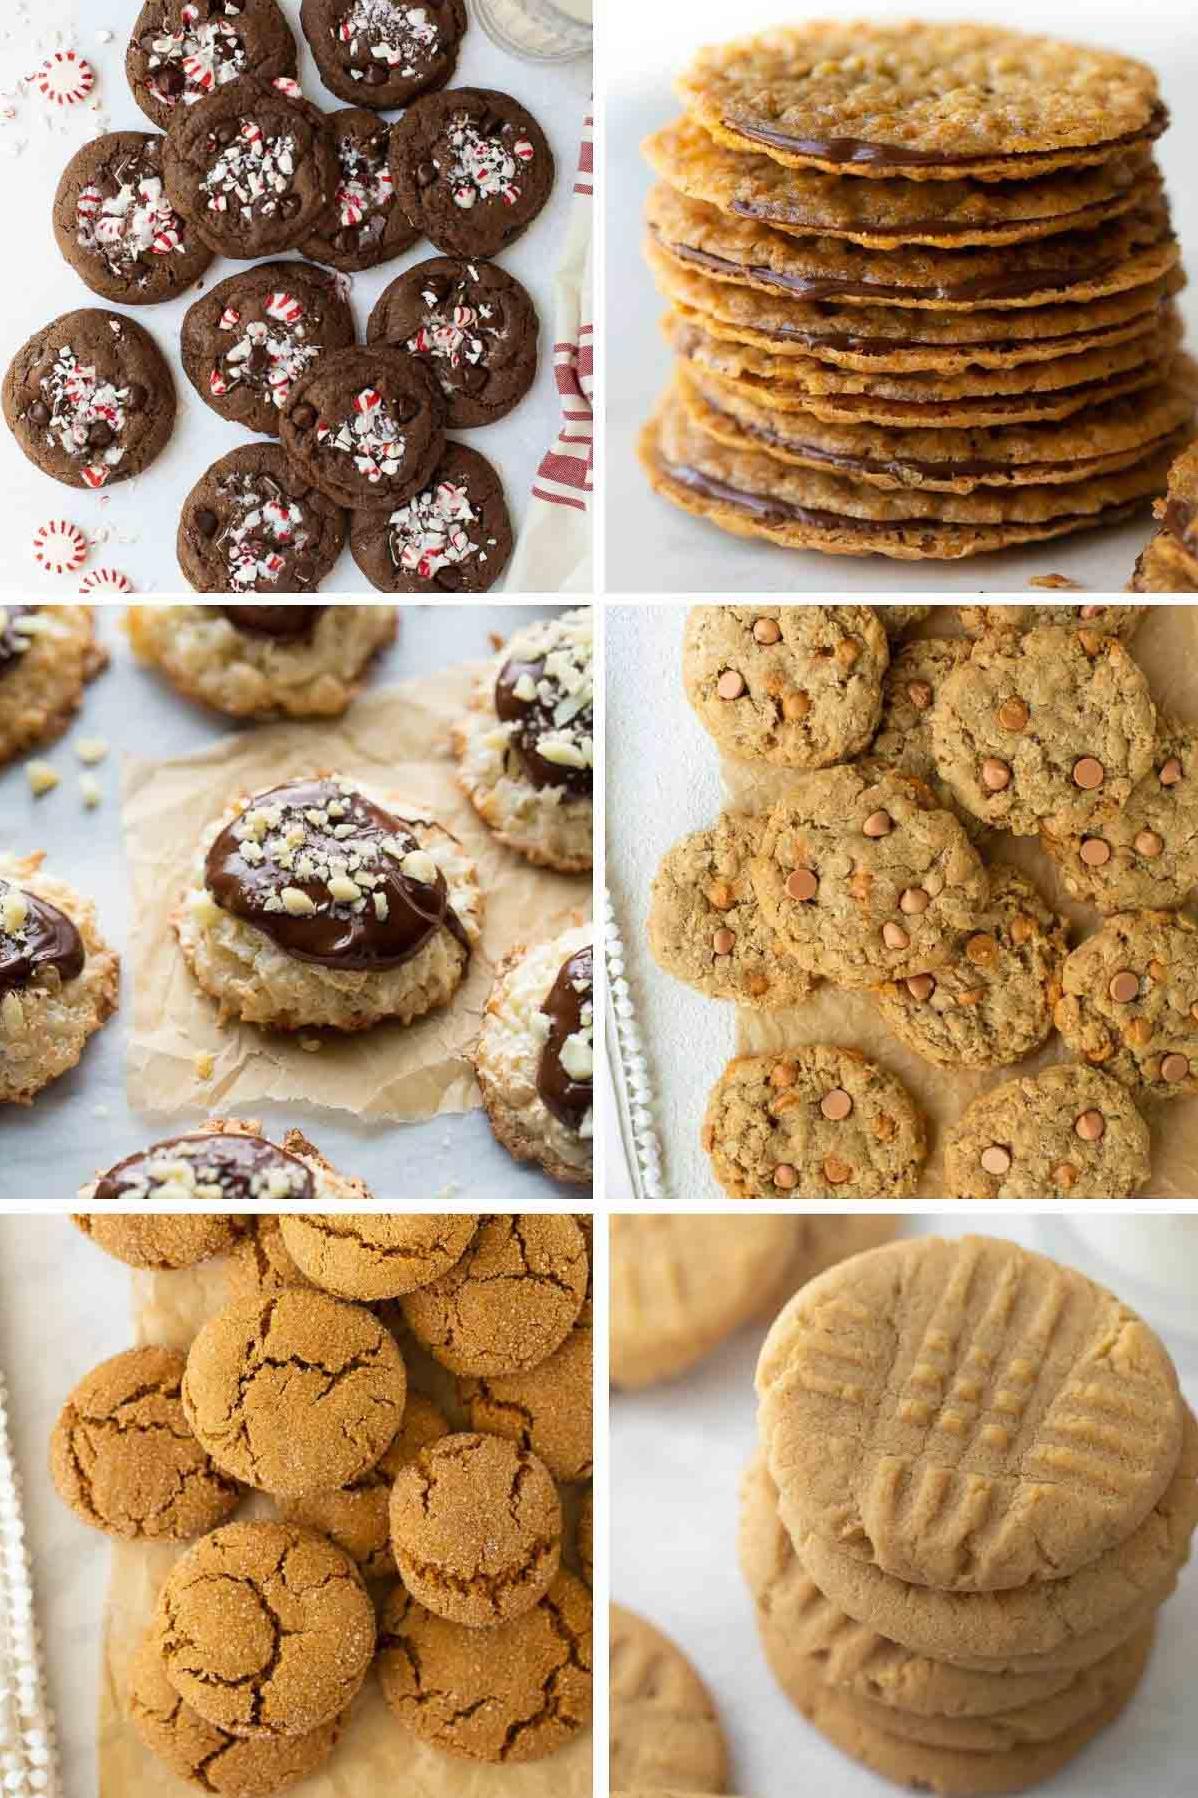  From rolling out the dough to decorating the cookies, baking these gluten-free Christmas cookies is a joy-filled process!